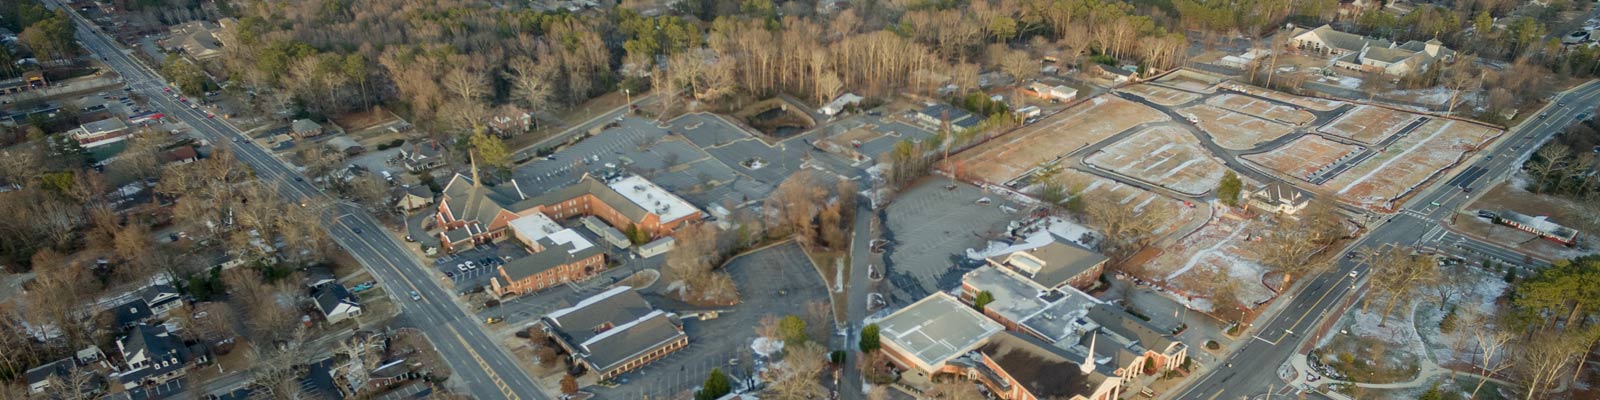 This is an aerial view of Alpharetta where ASTA-USA provides professional translation services.